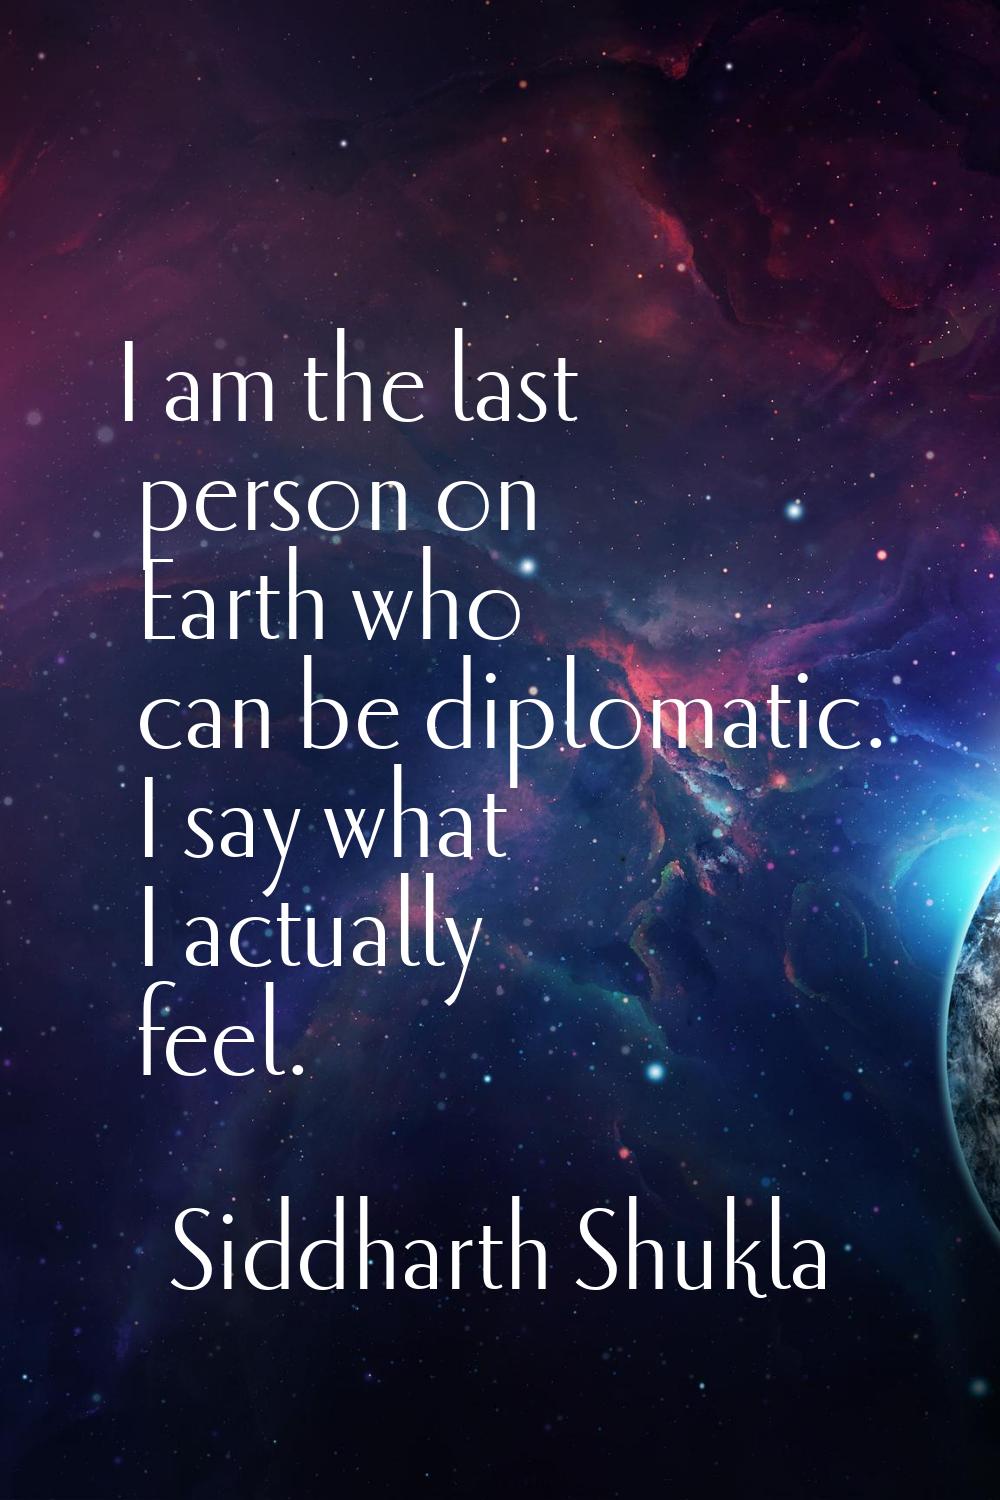 I am the last person on Earth who can be diplomatic. I say what I actually feel.